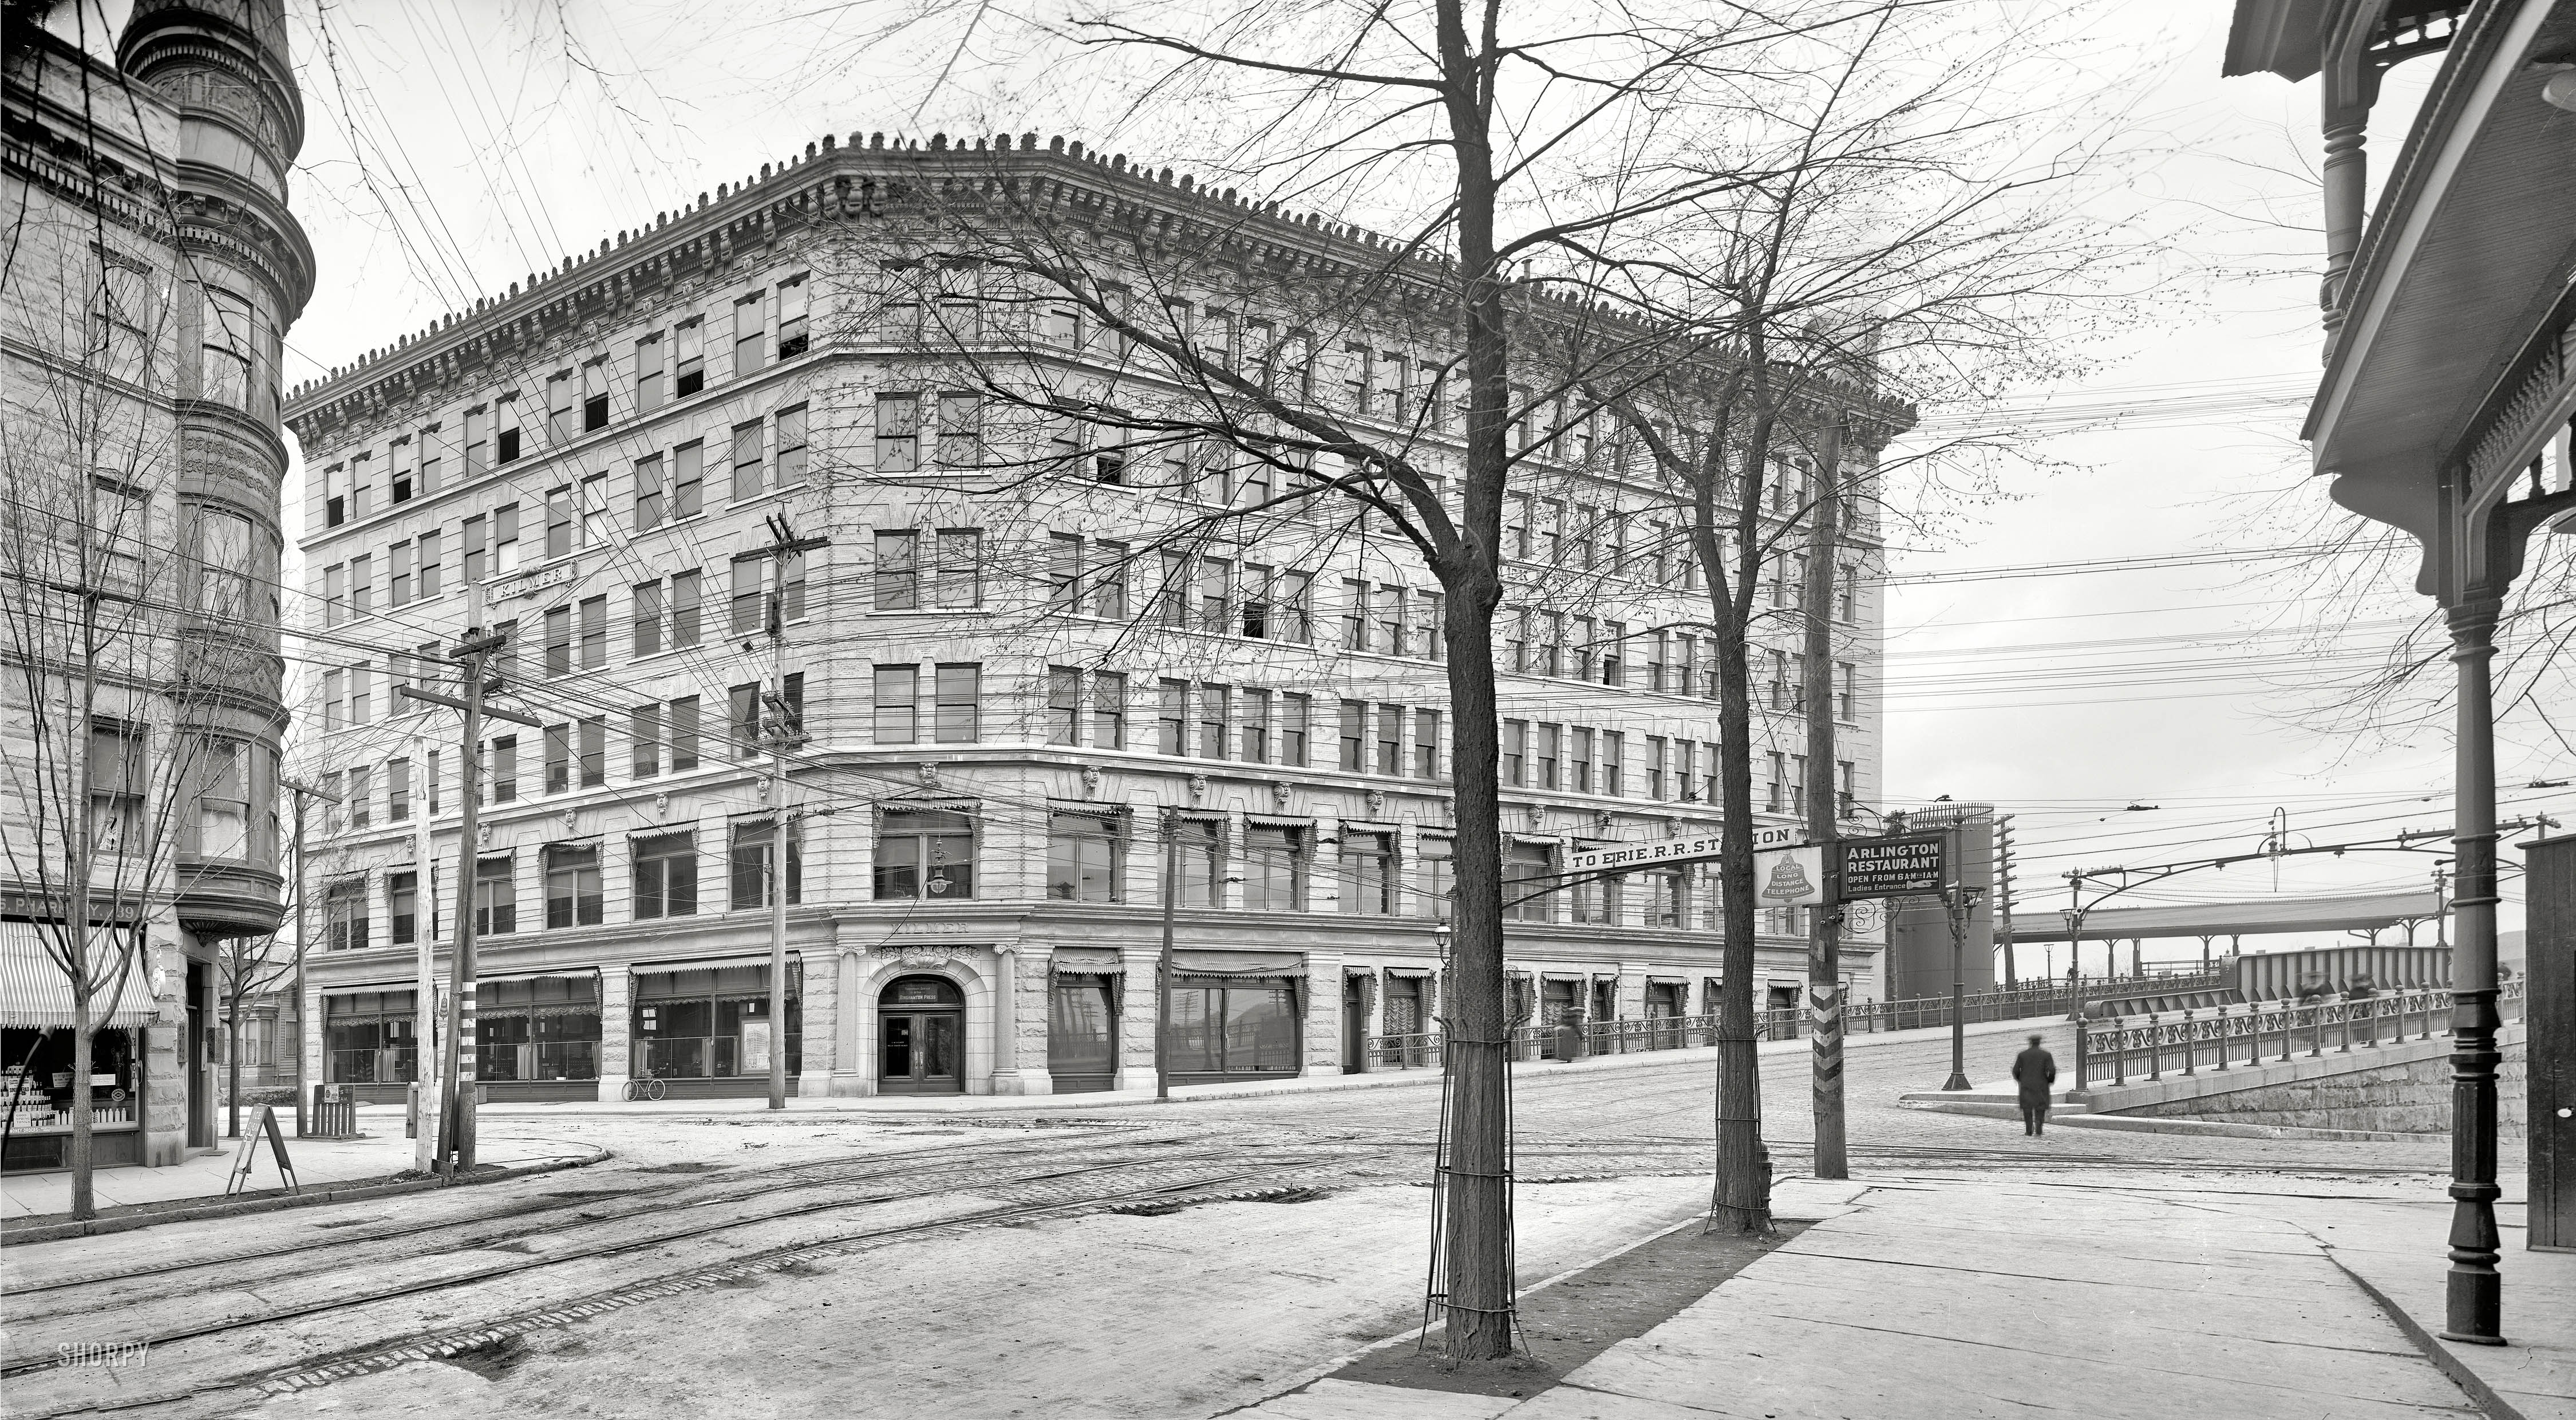 Binghamton, New York, circa 1905. "Kilmer factory." The wellspring of Dr. Kilmer's Swamp Root, a popular patent medicine. The building was also the temporary headquarters of another Kilmer enterprise, the Binghamton Press newspaper. Panorama of two 8x10 inch glass negatives. View full size.